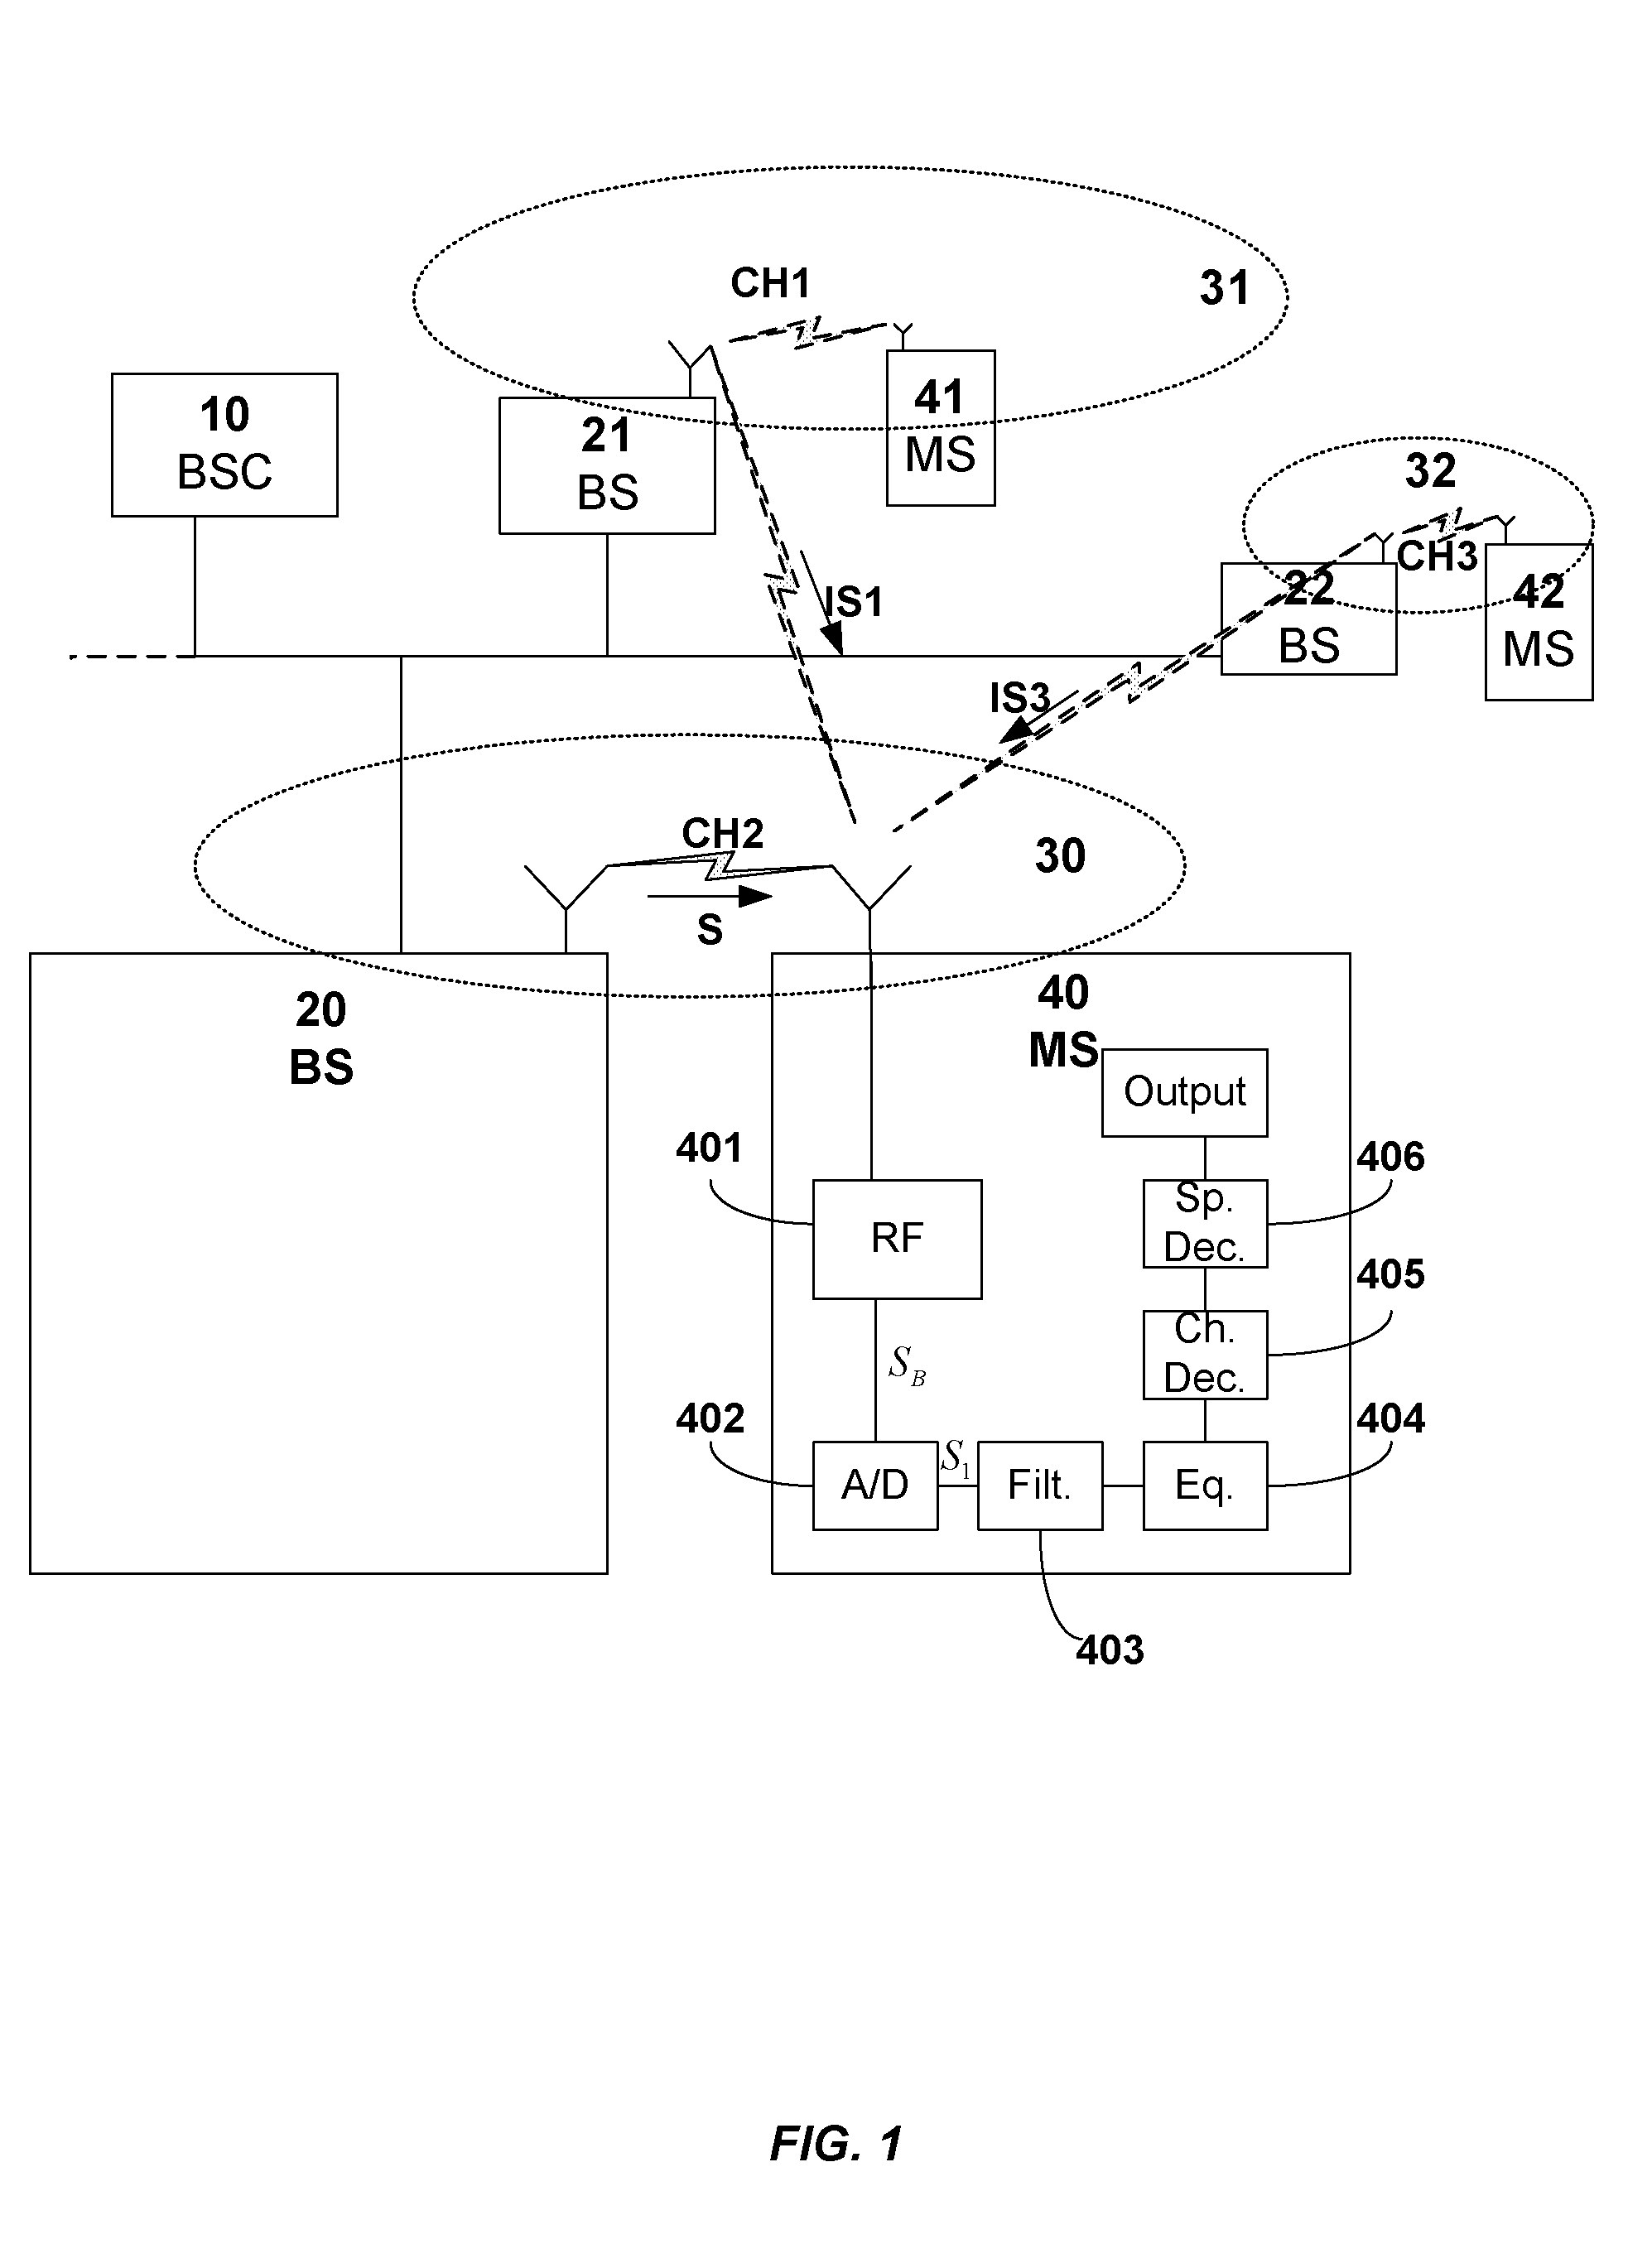 Filter and Method for Suppressing Effects of Adjacent-Channel Interference